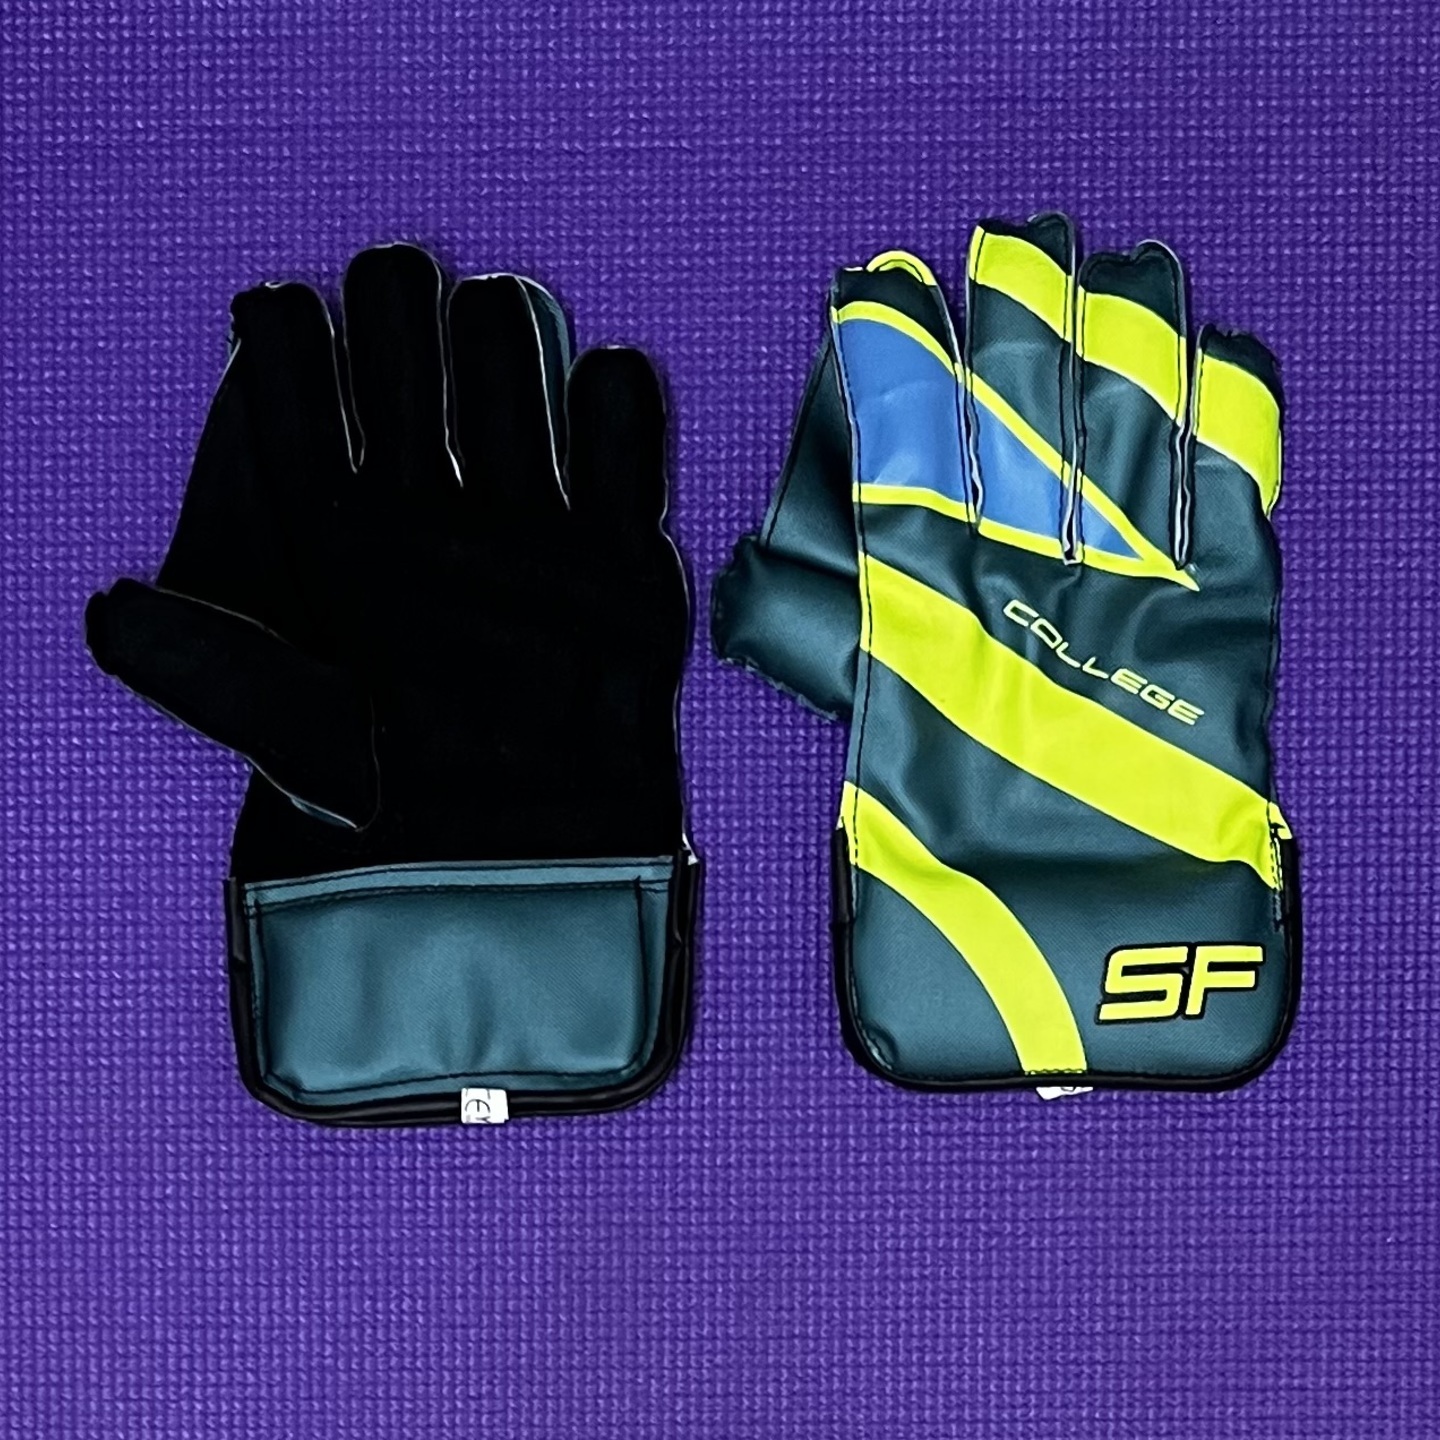 SF COLLEGE CRICKET WICKET KEEPING GLOVES YOUTH